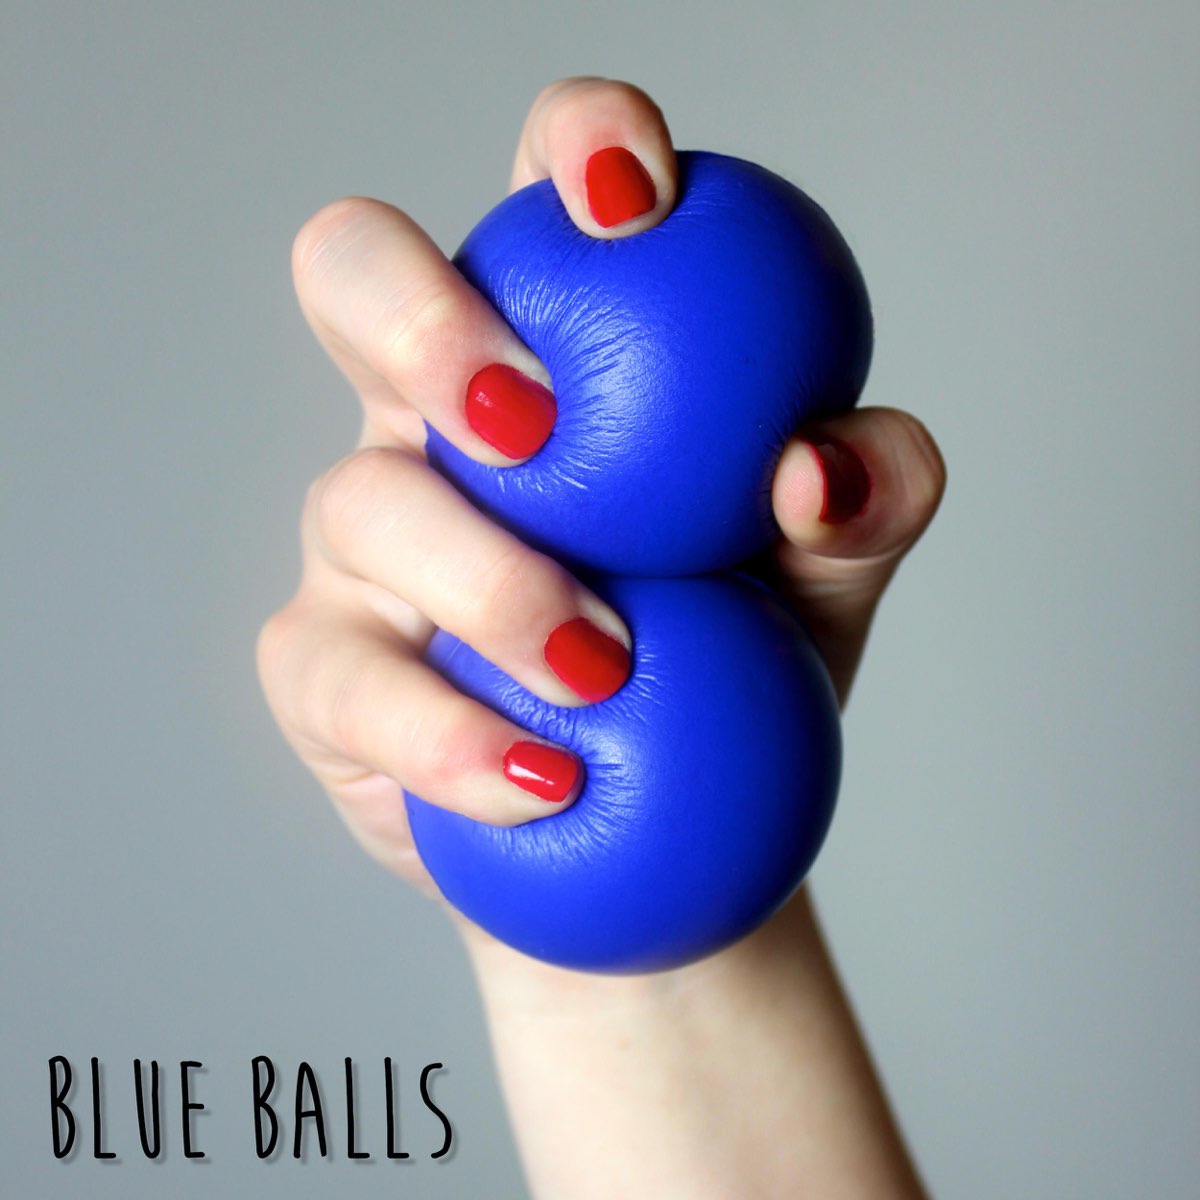 What Do Blue Balls Look Like